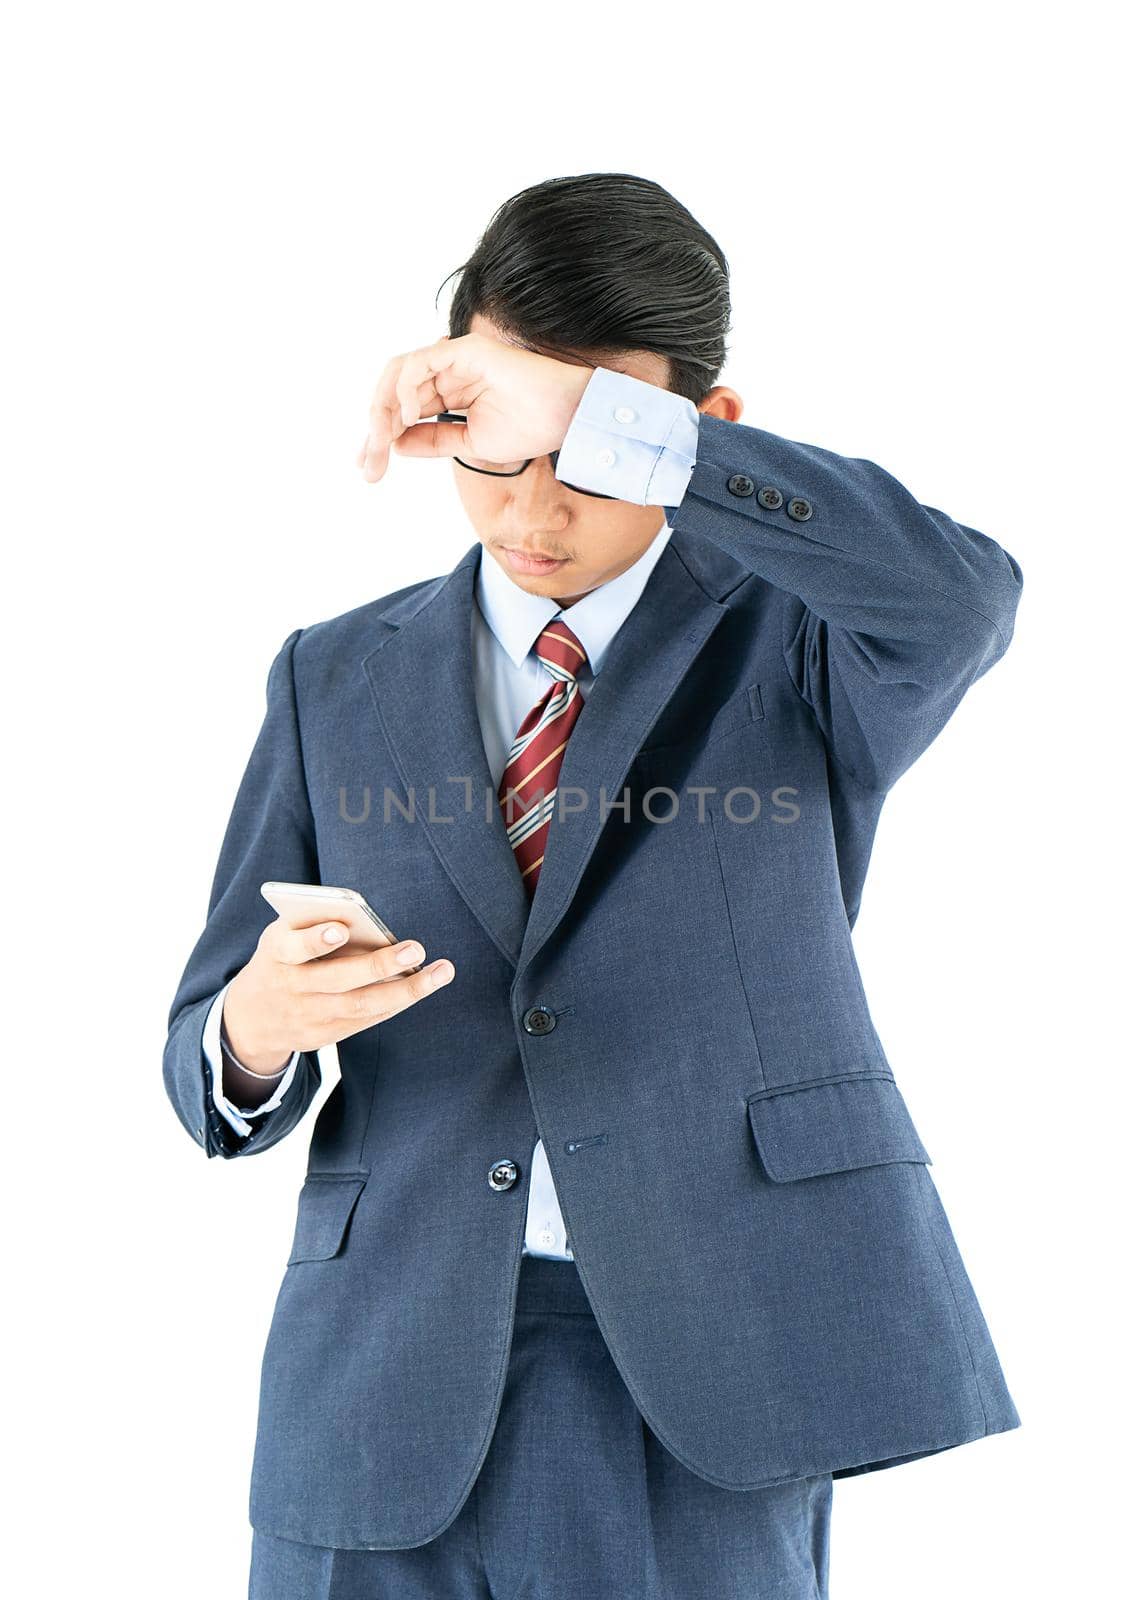 Businessman in suit holding a smartphone over white background